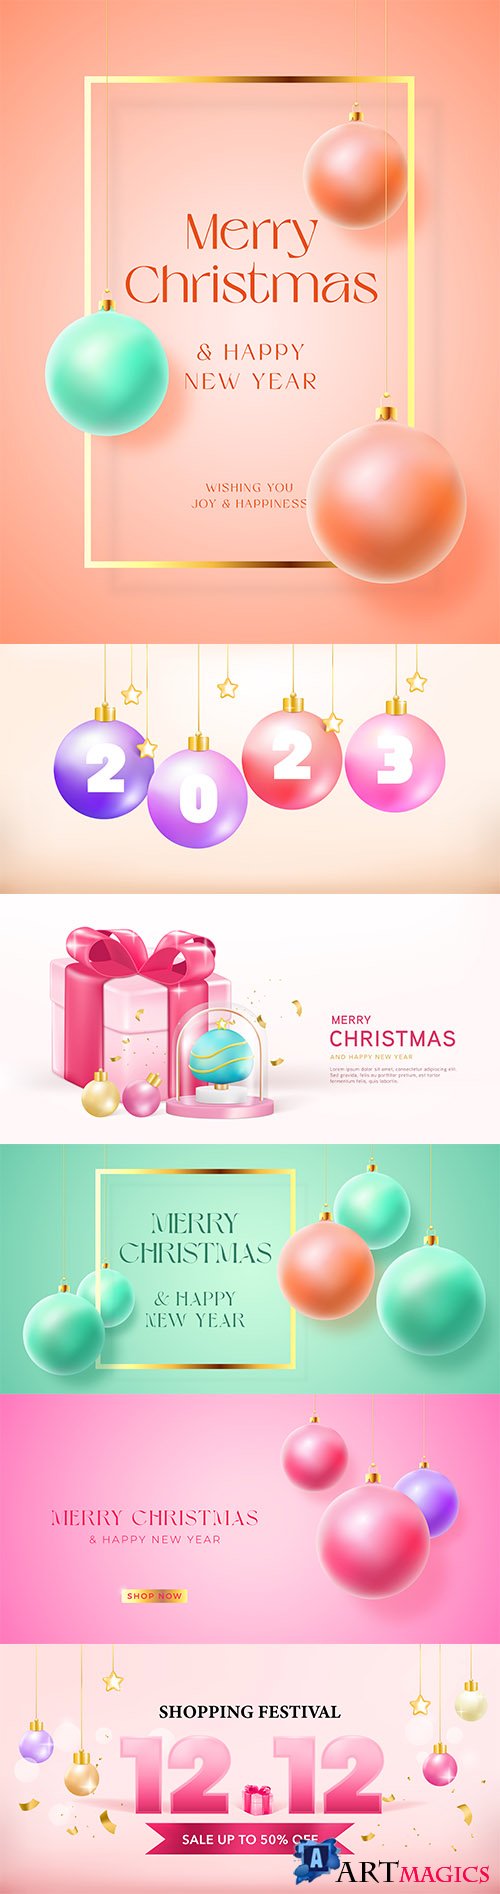 Happy new year and merry christmas banner, gift box christmas decorative design